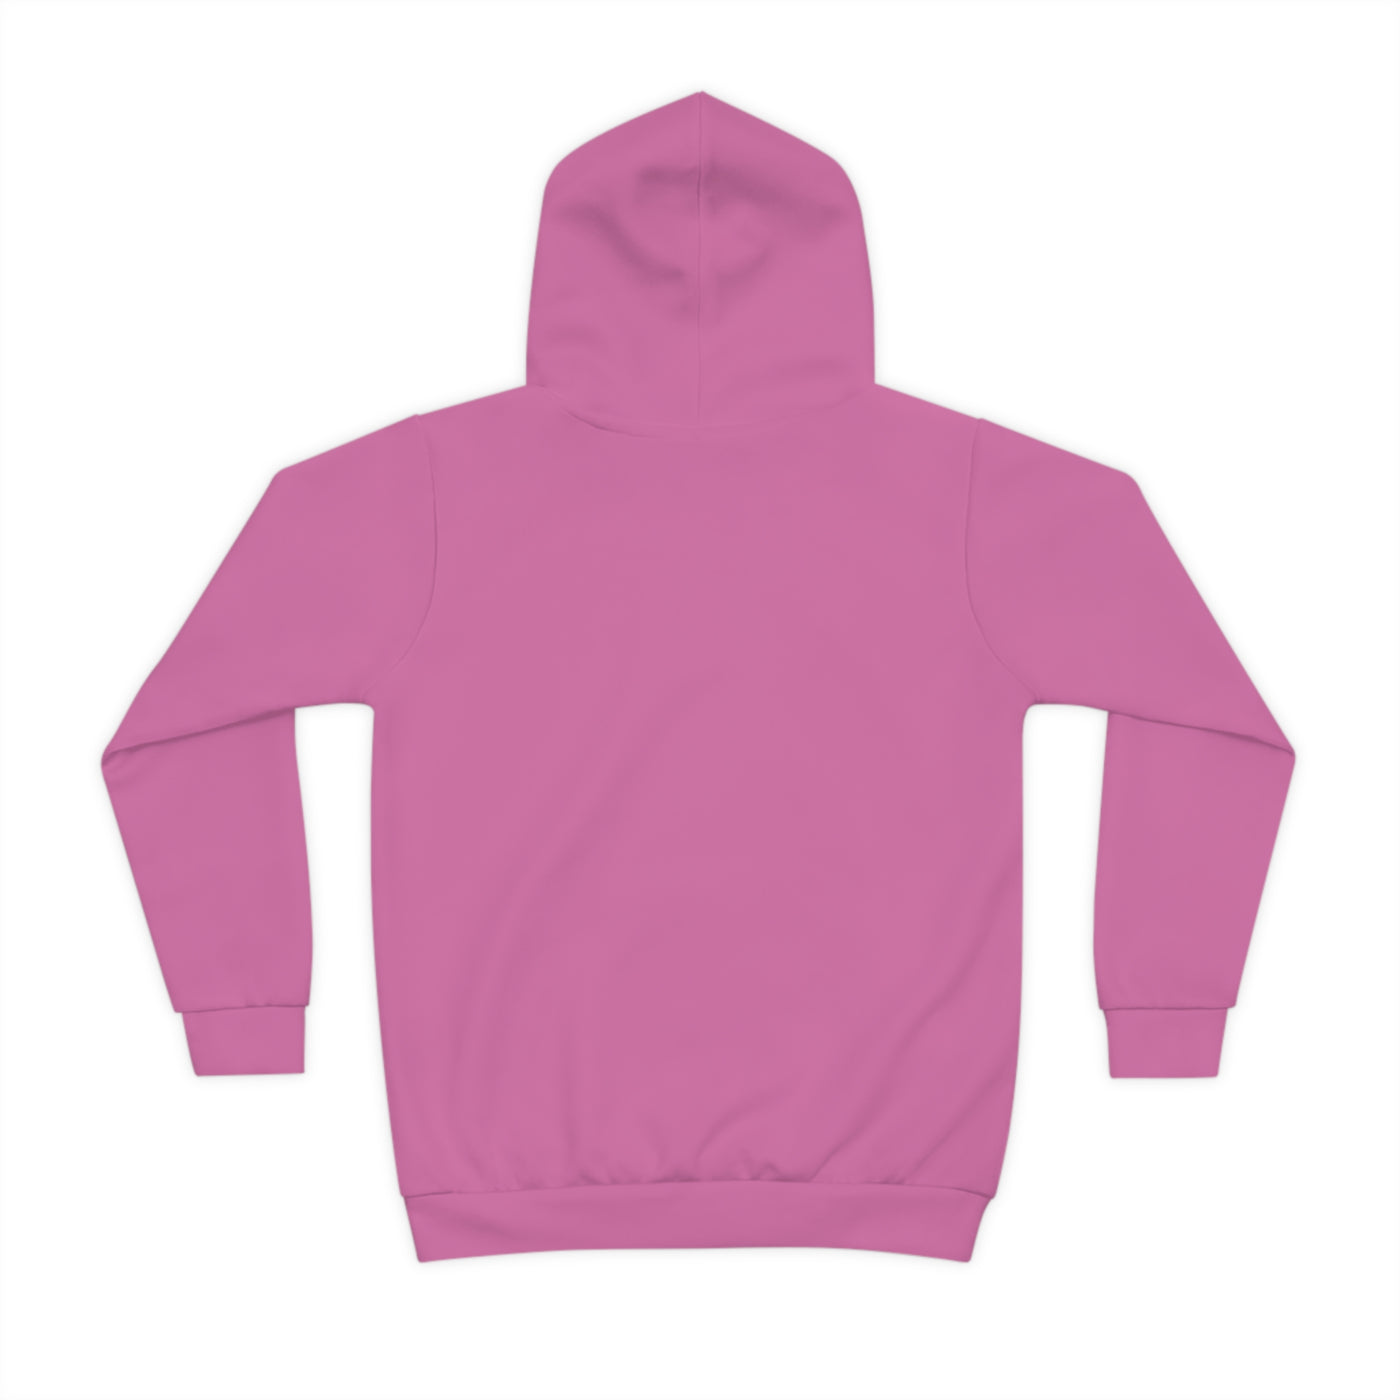 King Moore World Kids Hoodie (Light Pink) Sublimation